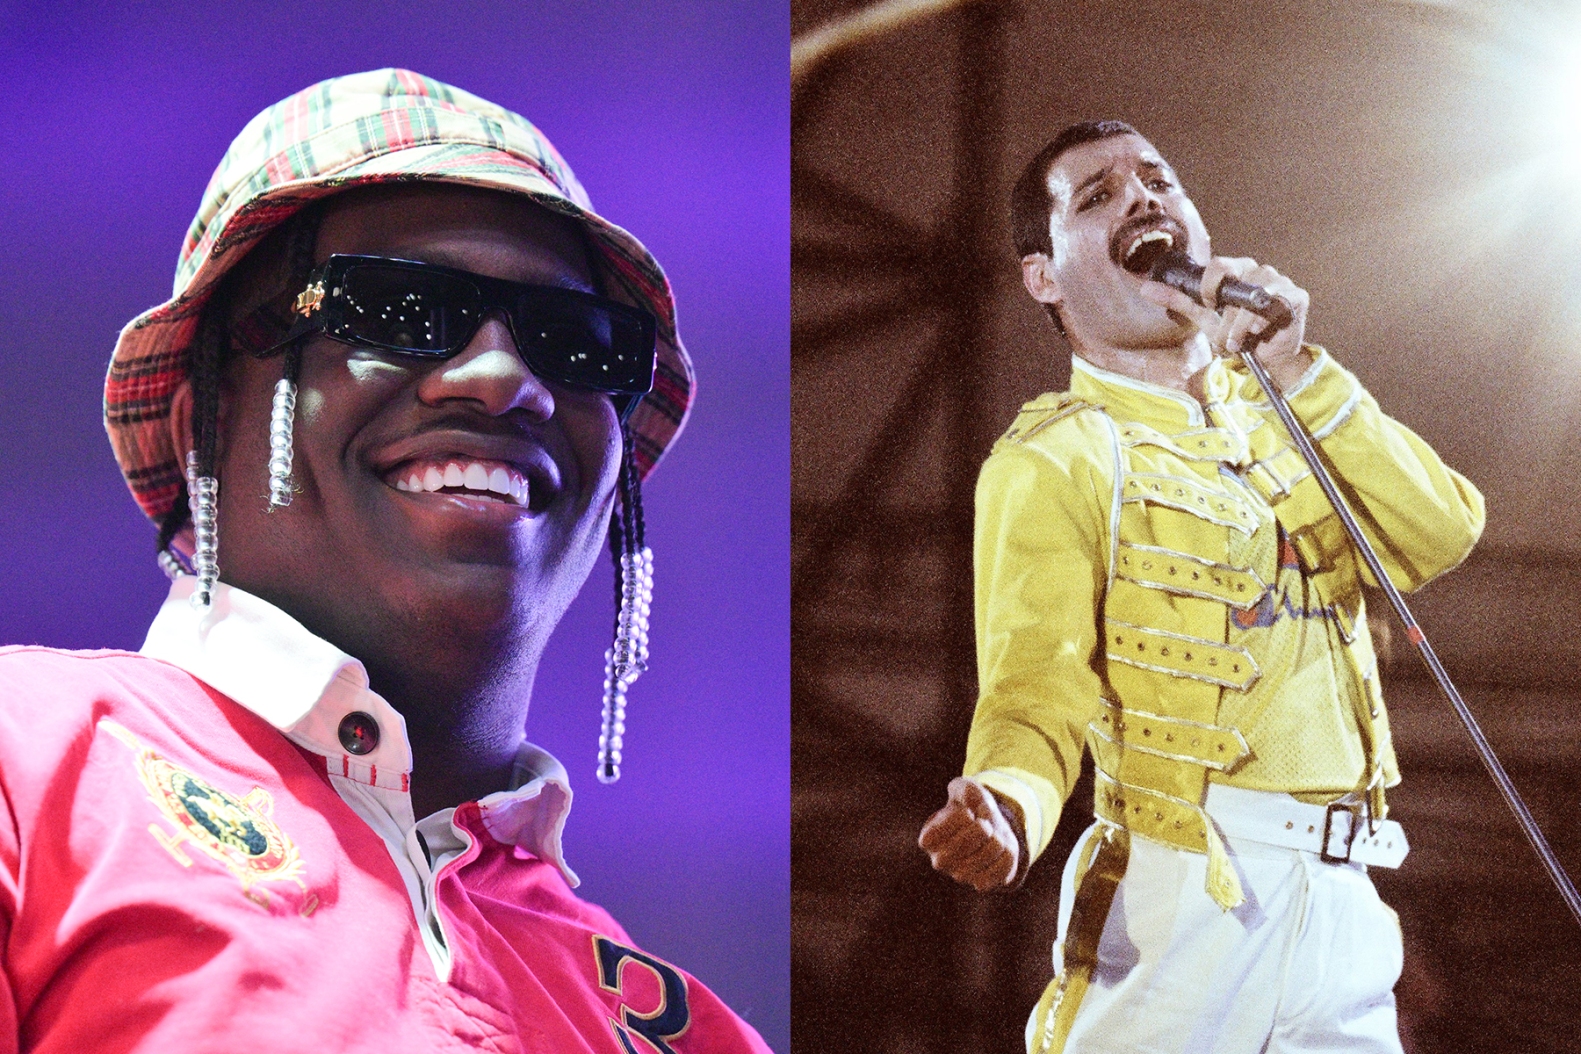 The Wildest Left-Turn Albums Ever, From Lil Yachty to Queen to Taylor Swift